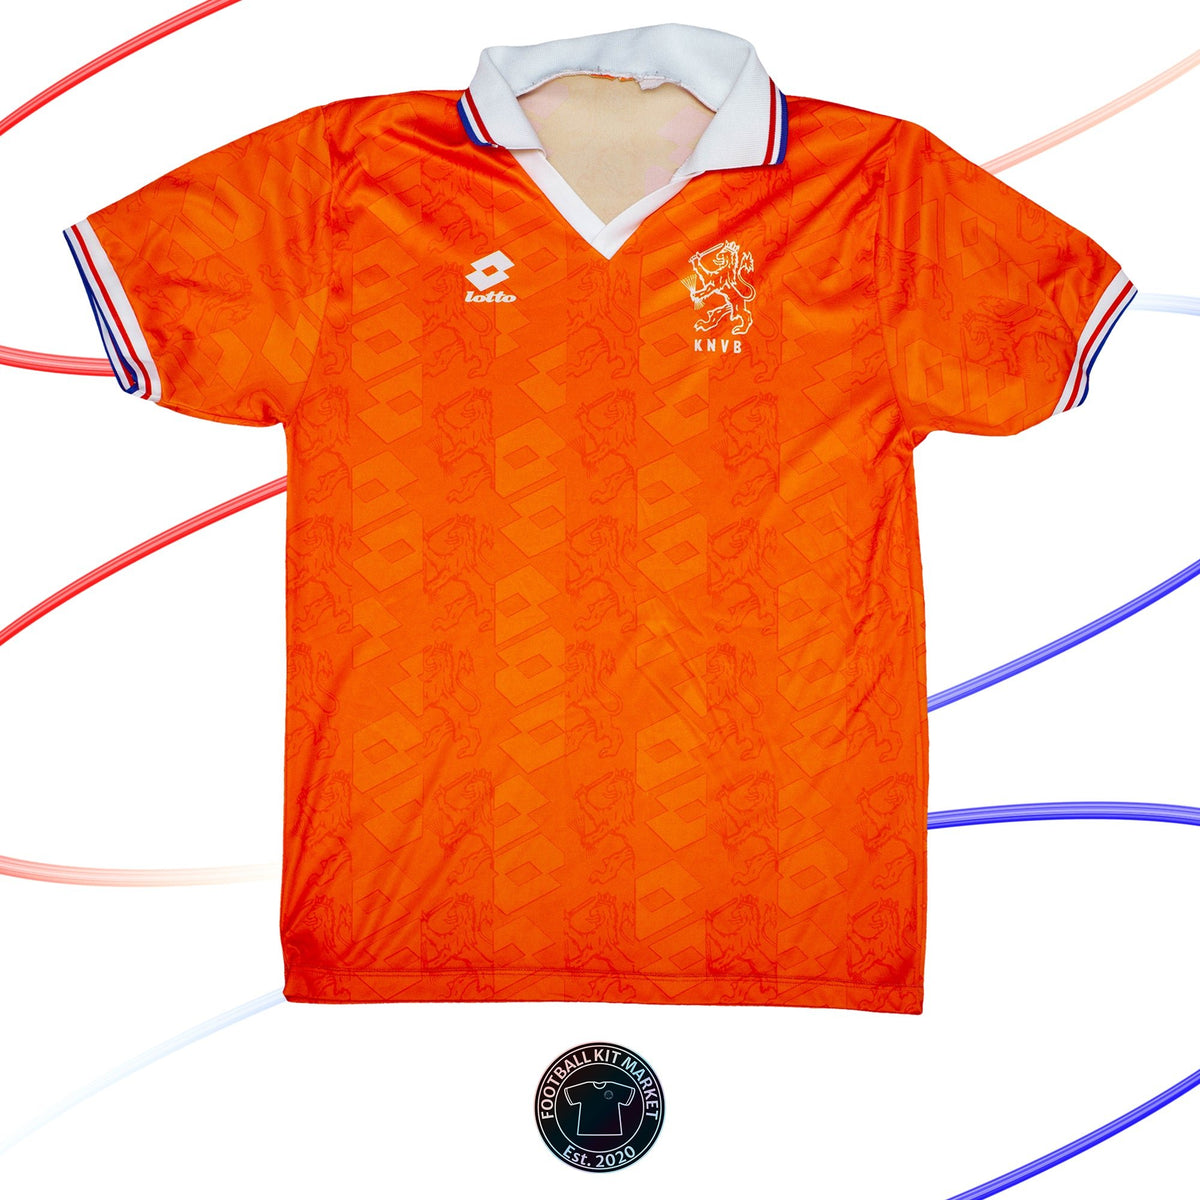 Genuine NETHERLANDS Home (1994-1996) - LOTTO (L) - Product Image from Football Kit Market